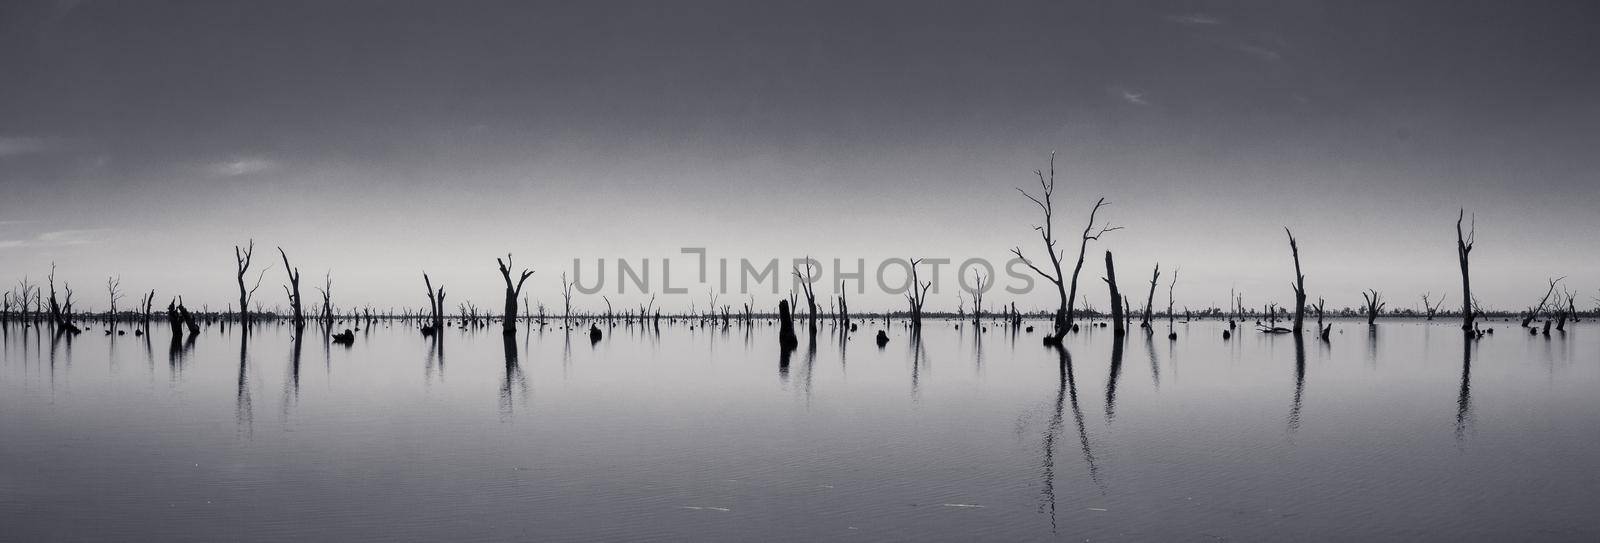 black and white Picture of dead tree trunks sticking out of the water,NSW, Australia